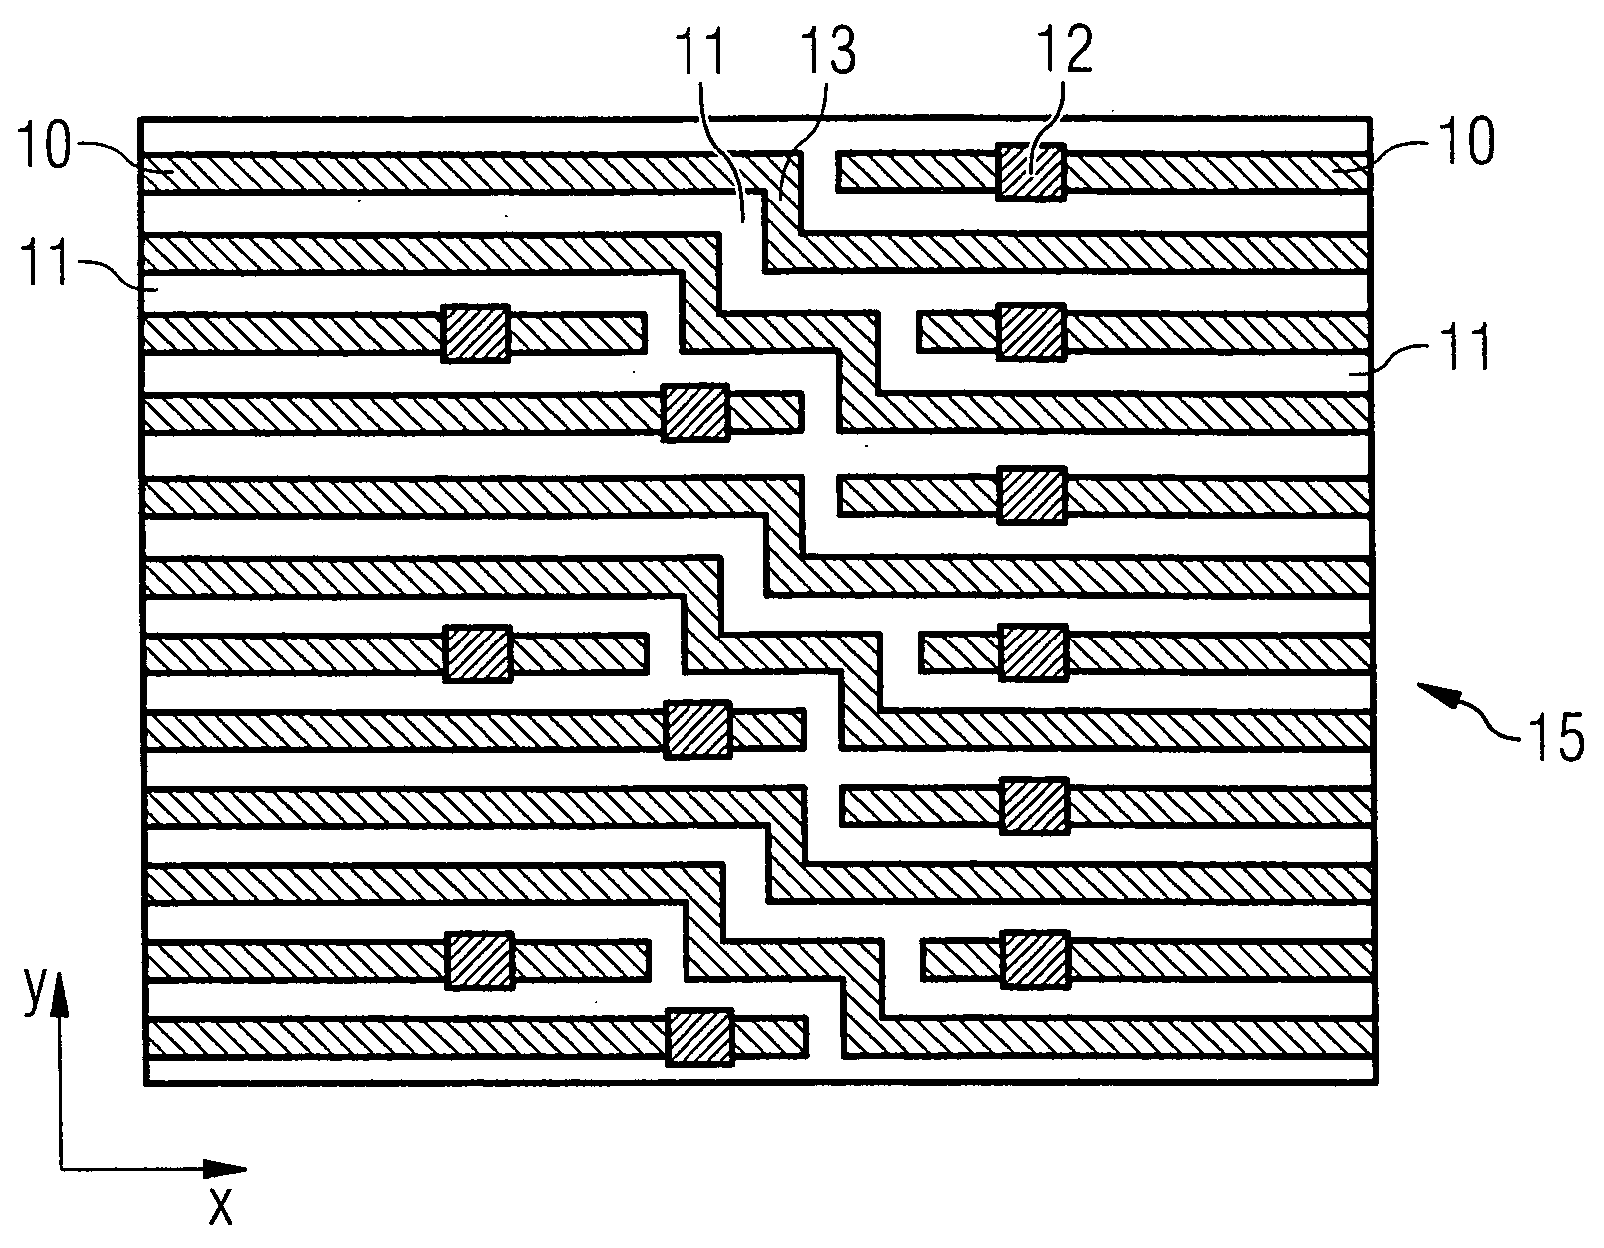 Method for producing semiconductor patterns on a wafer